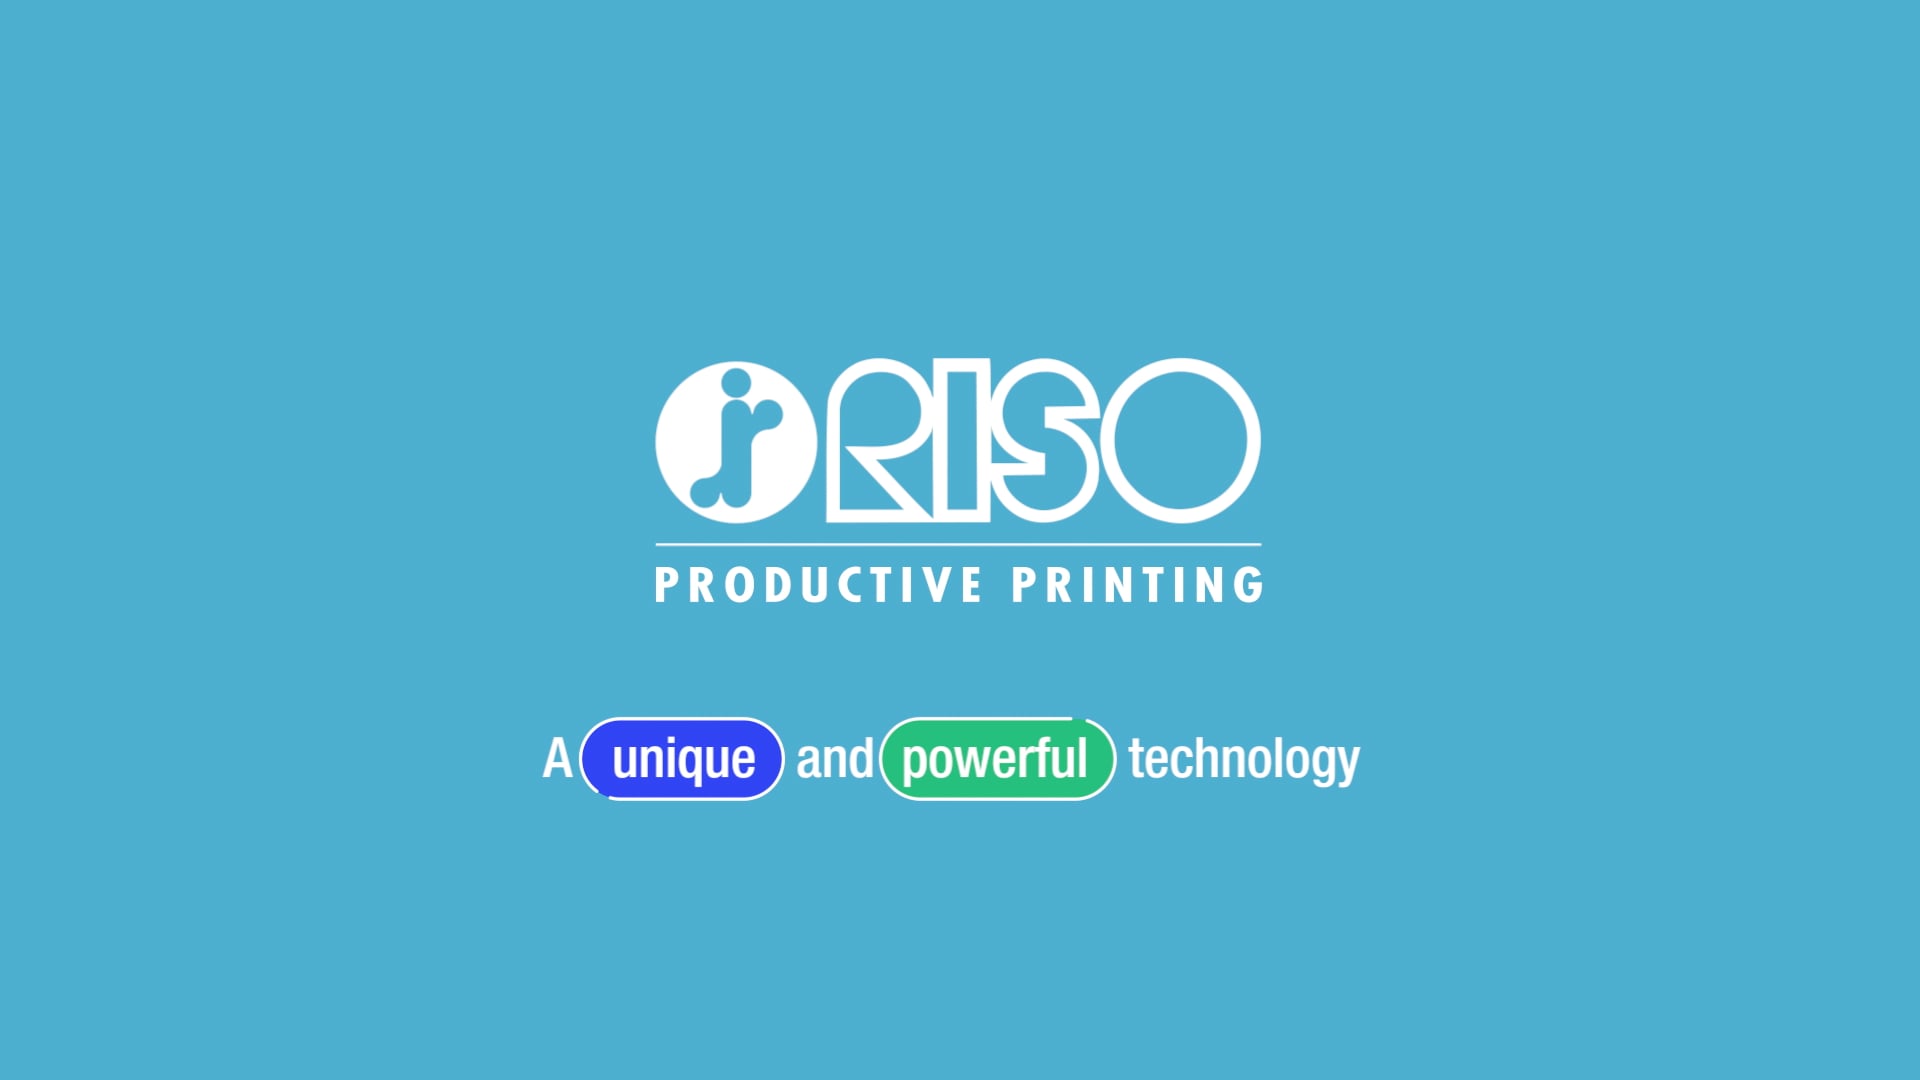 A unique and powerful technology | RISO